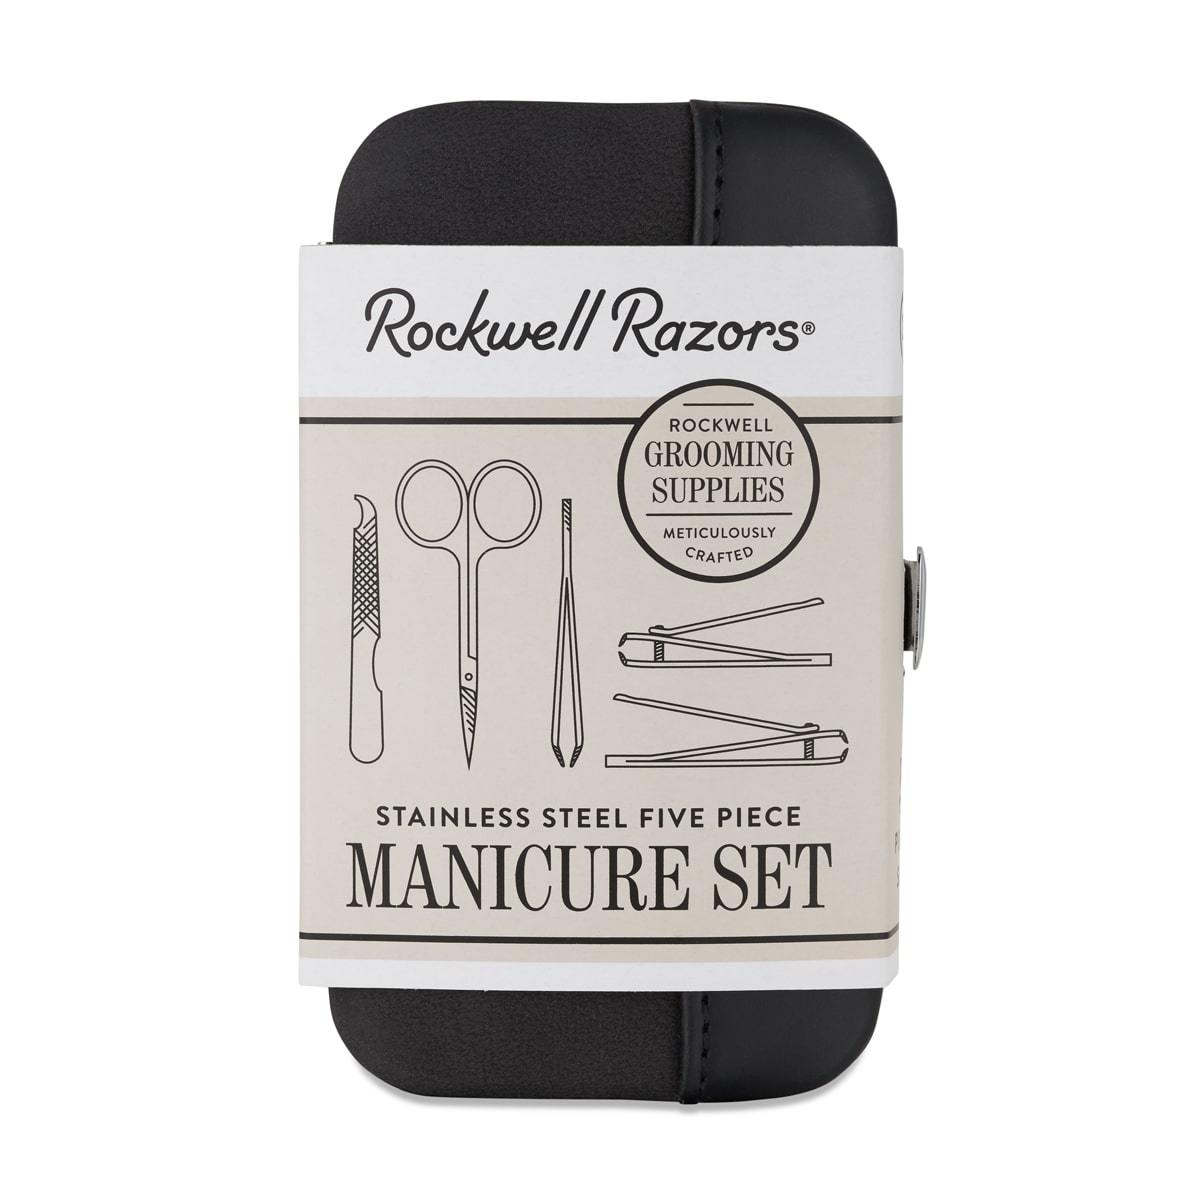 RockWell Razors Stainless Steel Manicure Set